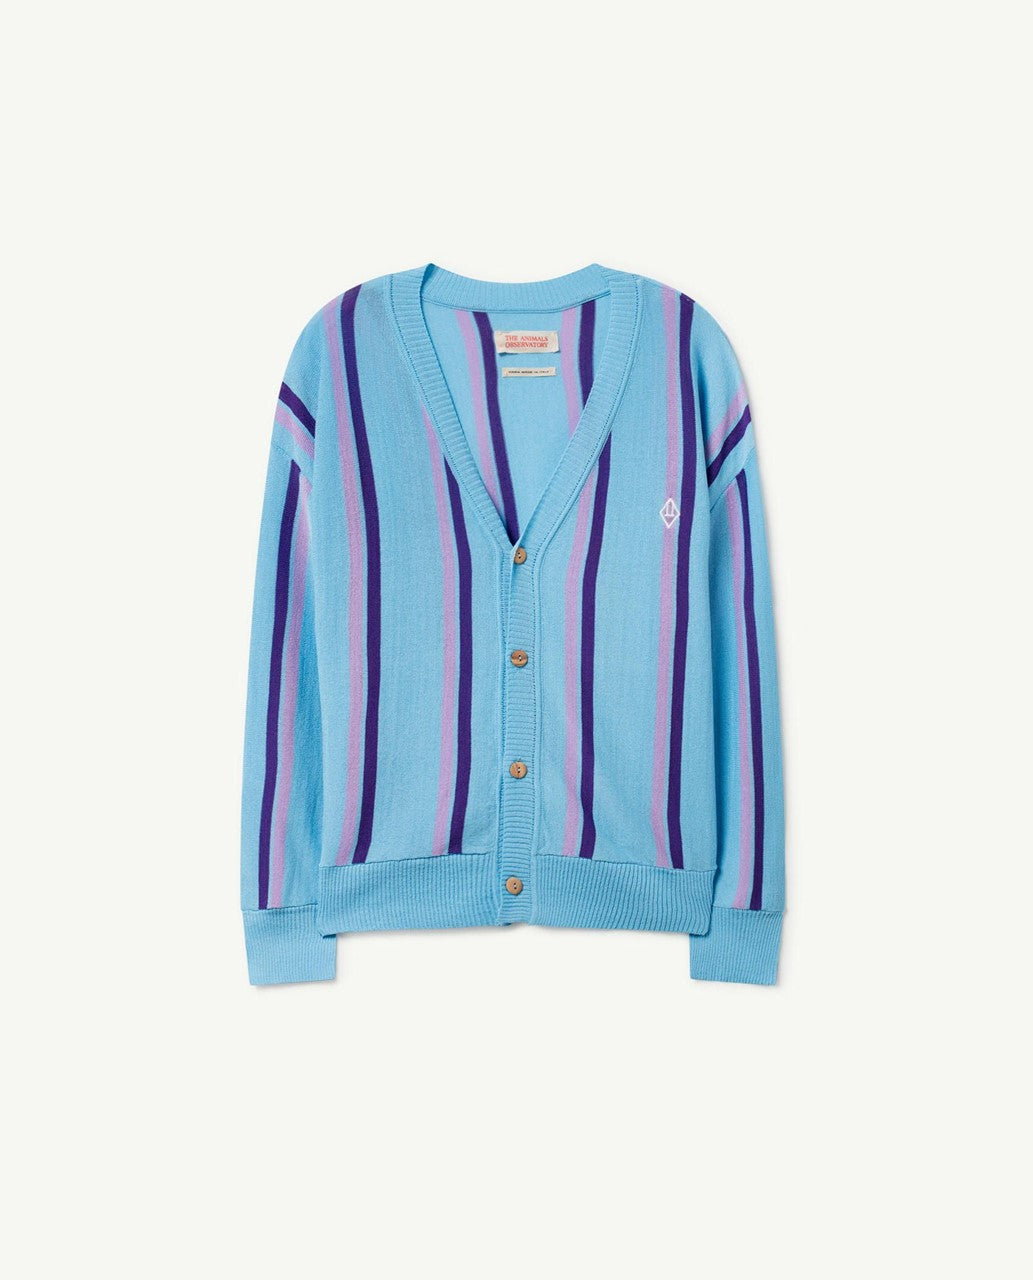 The Animals Observatory Blue Stripes Racoon Cardigan